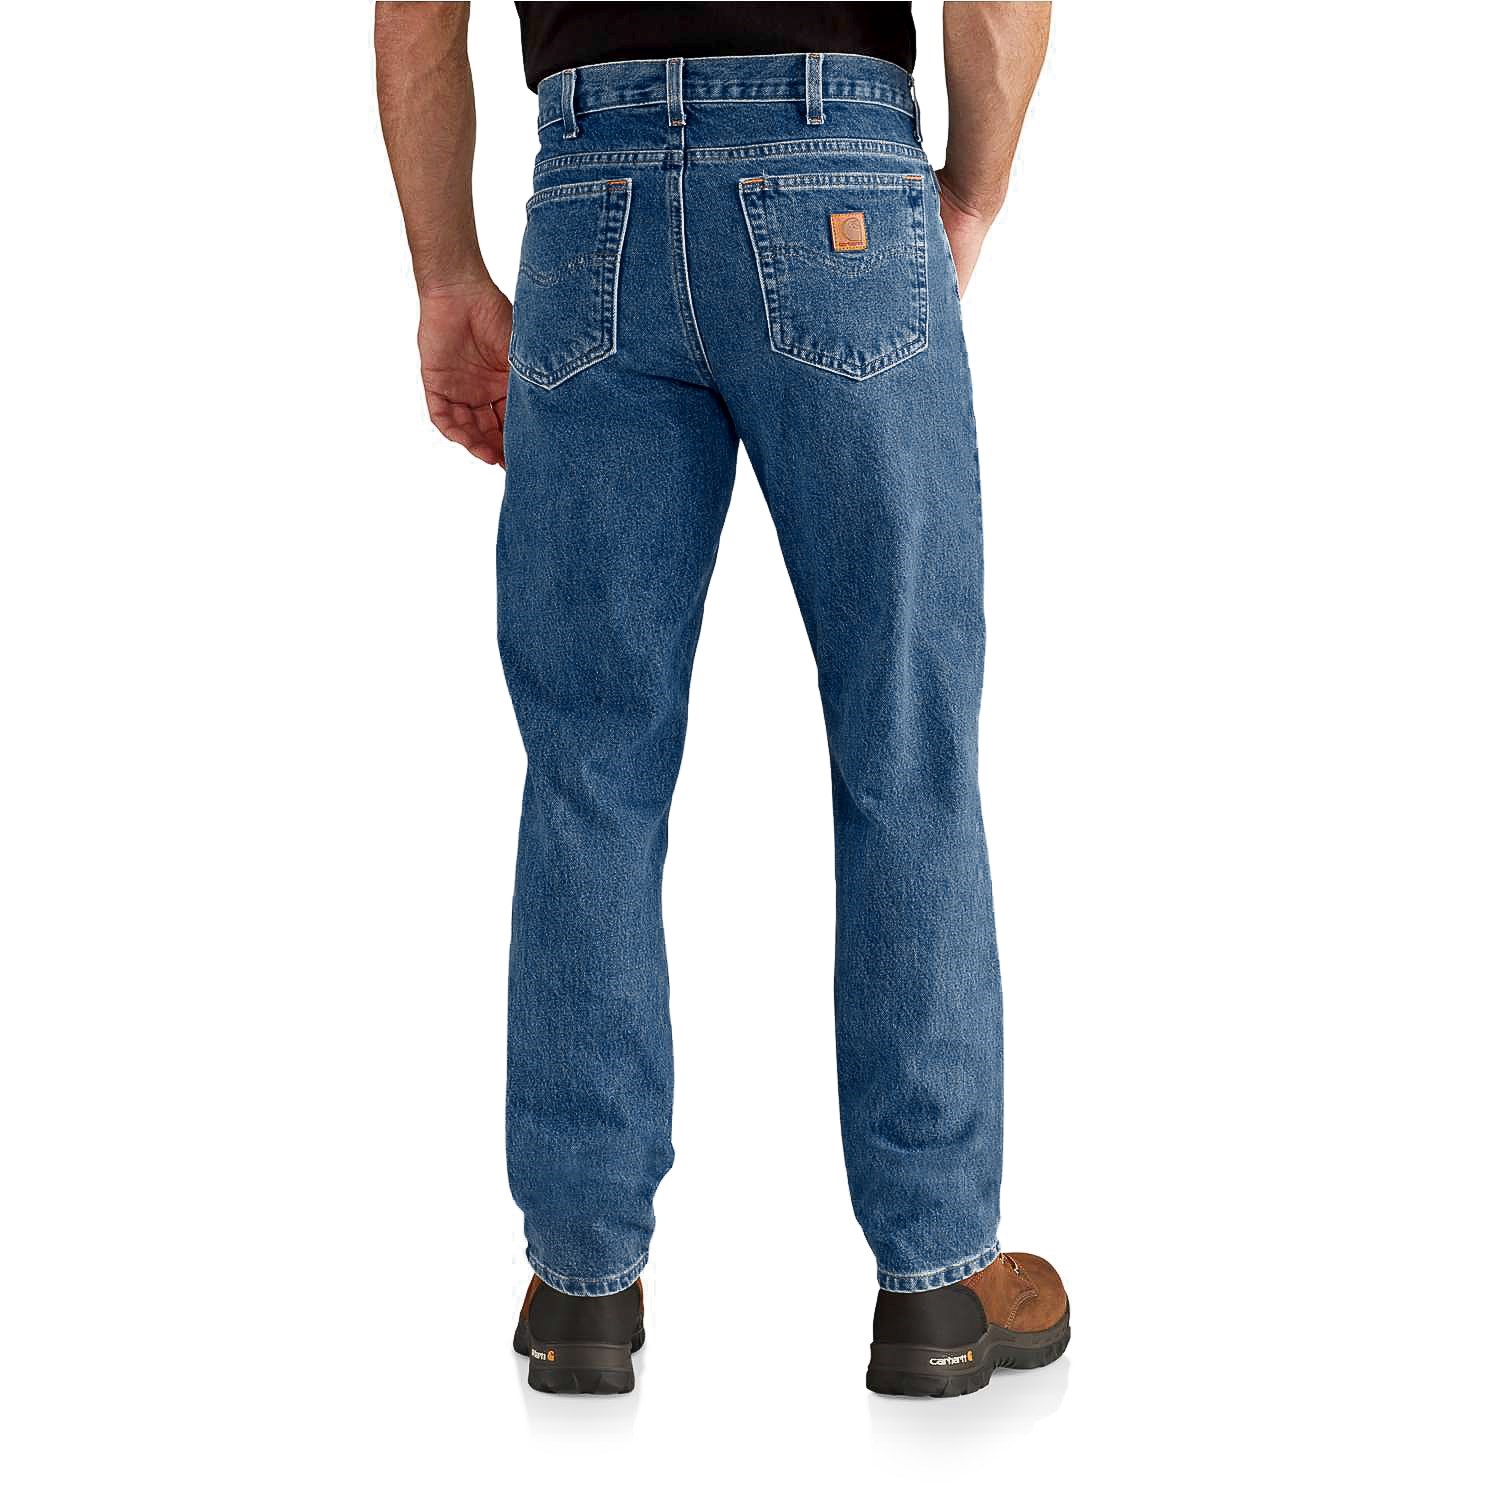 Carhartt Traditional Fit Work Jeans (For Men)